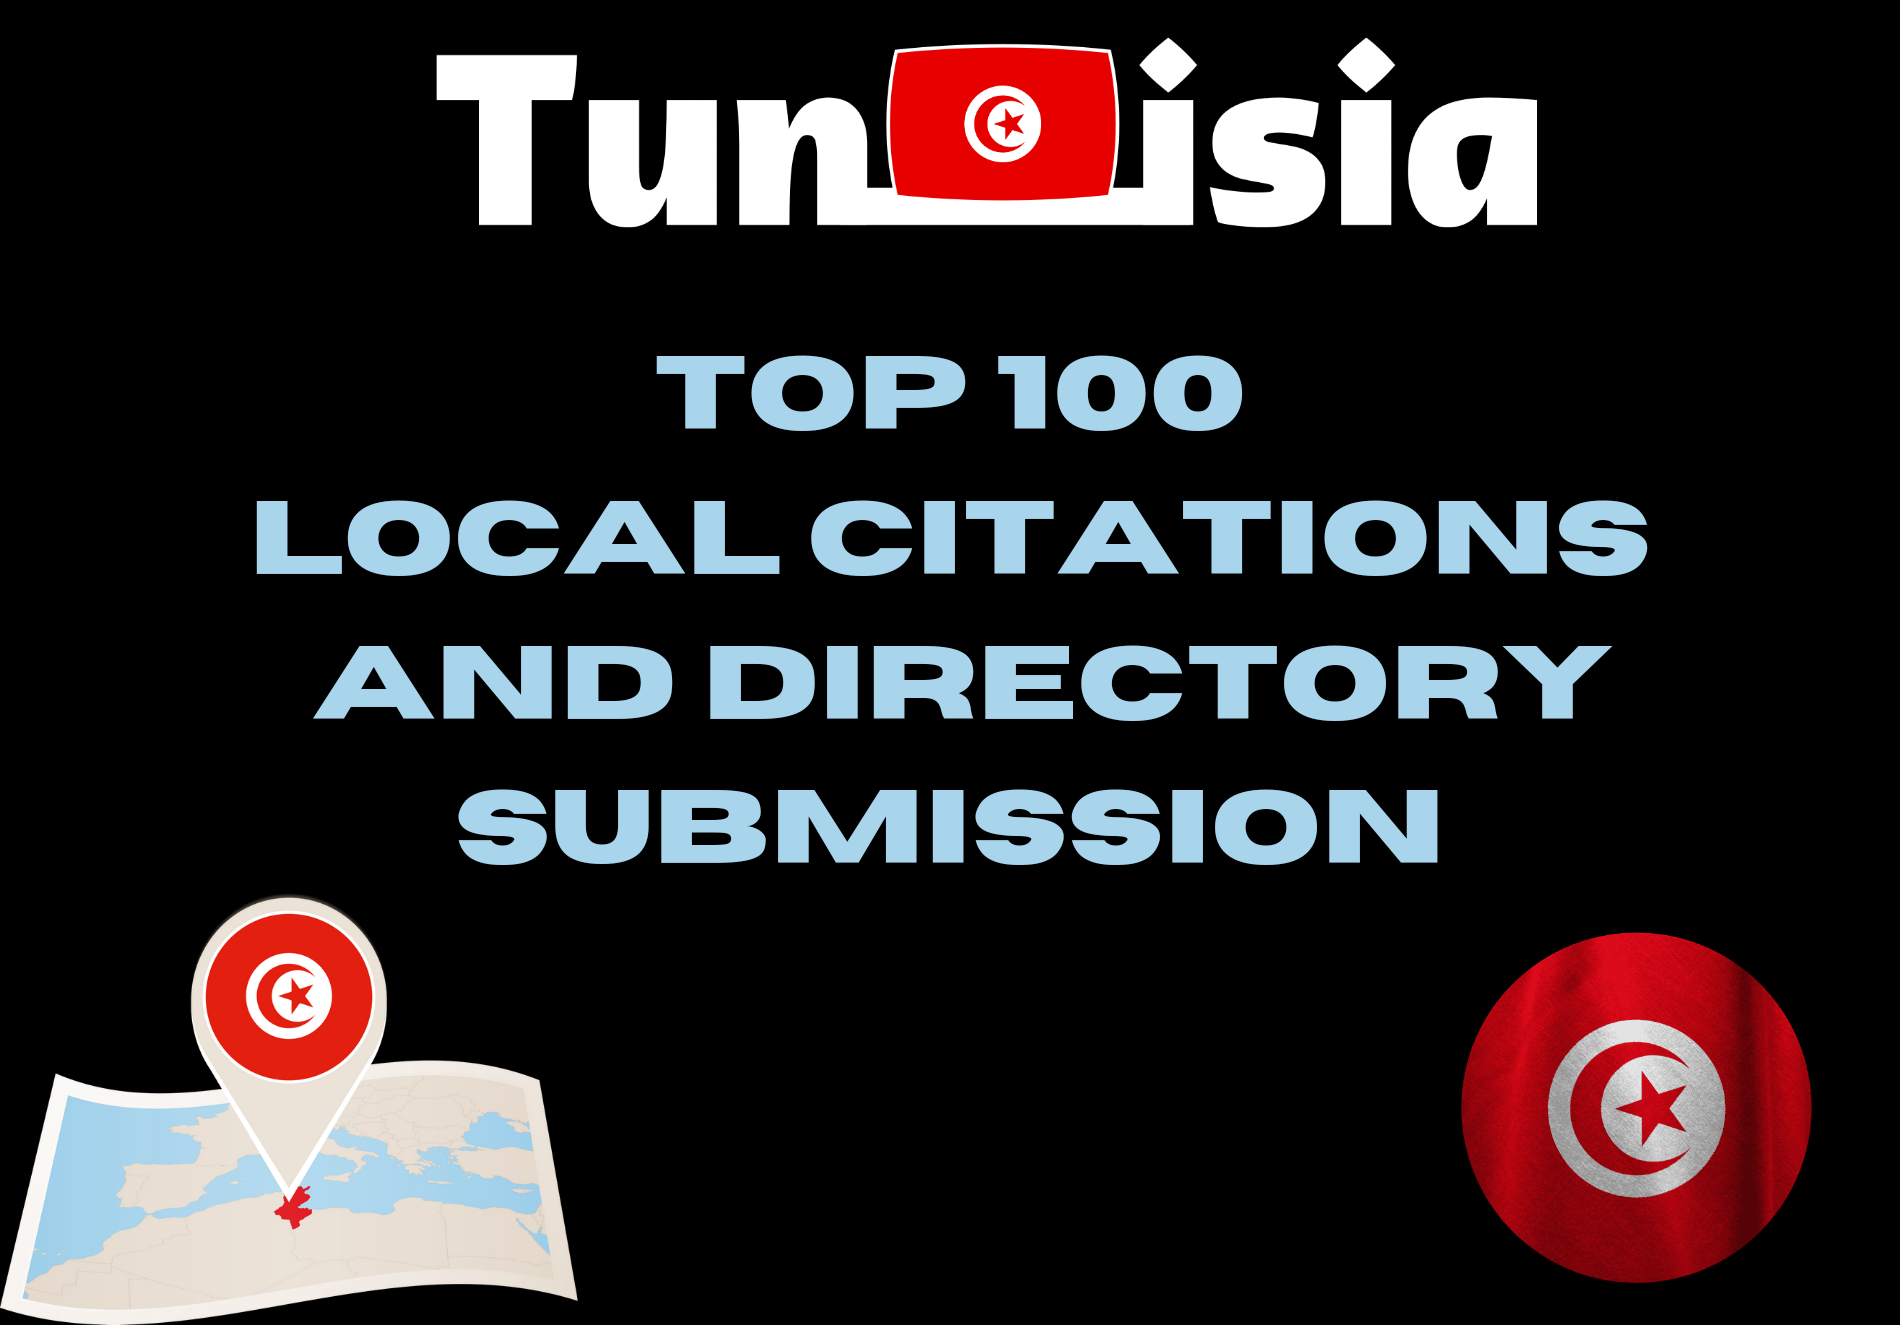 Top 100 Tunisia local citations and directory submission 